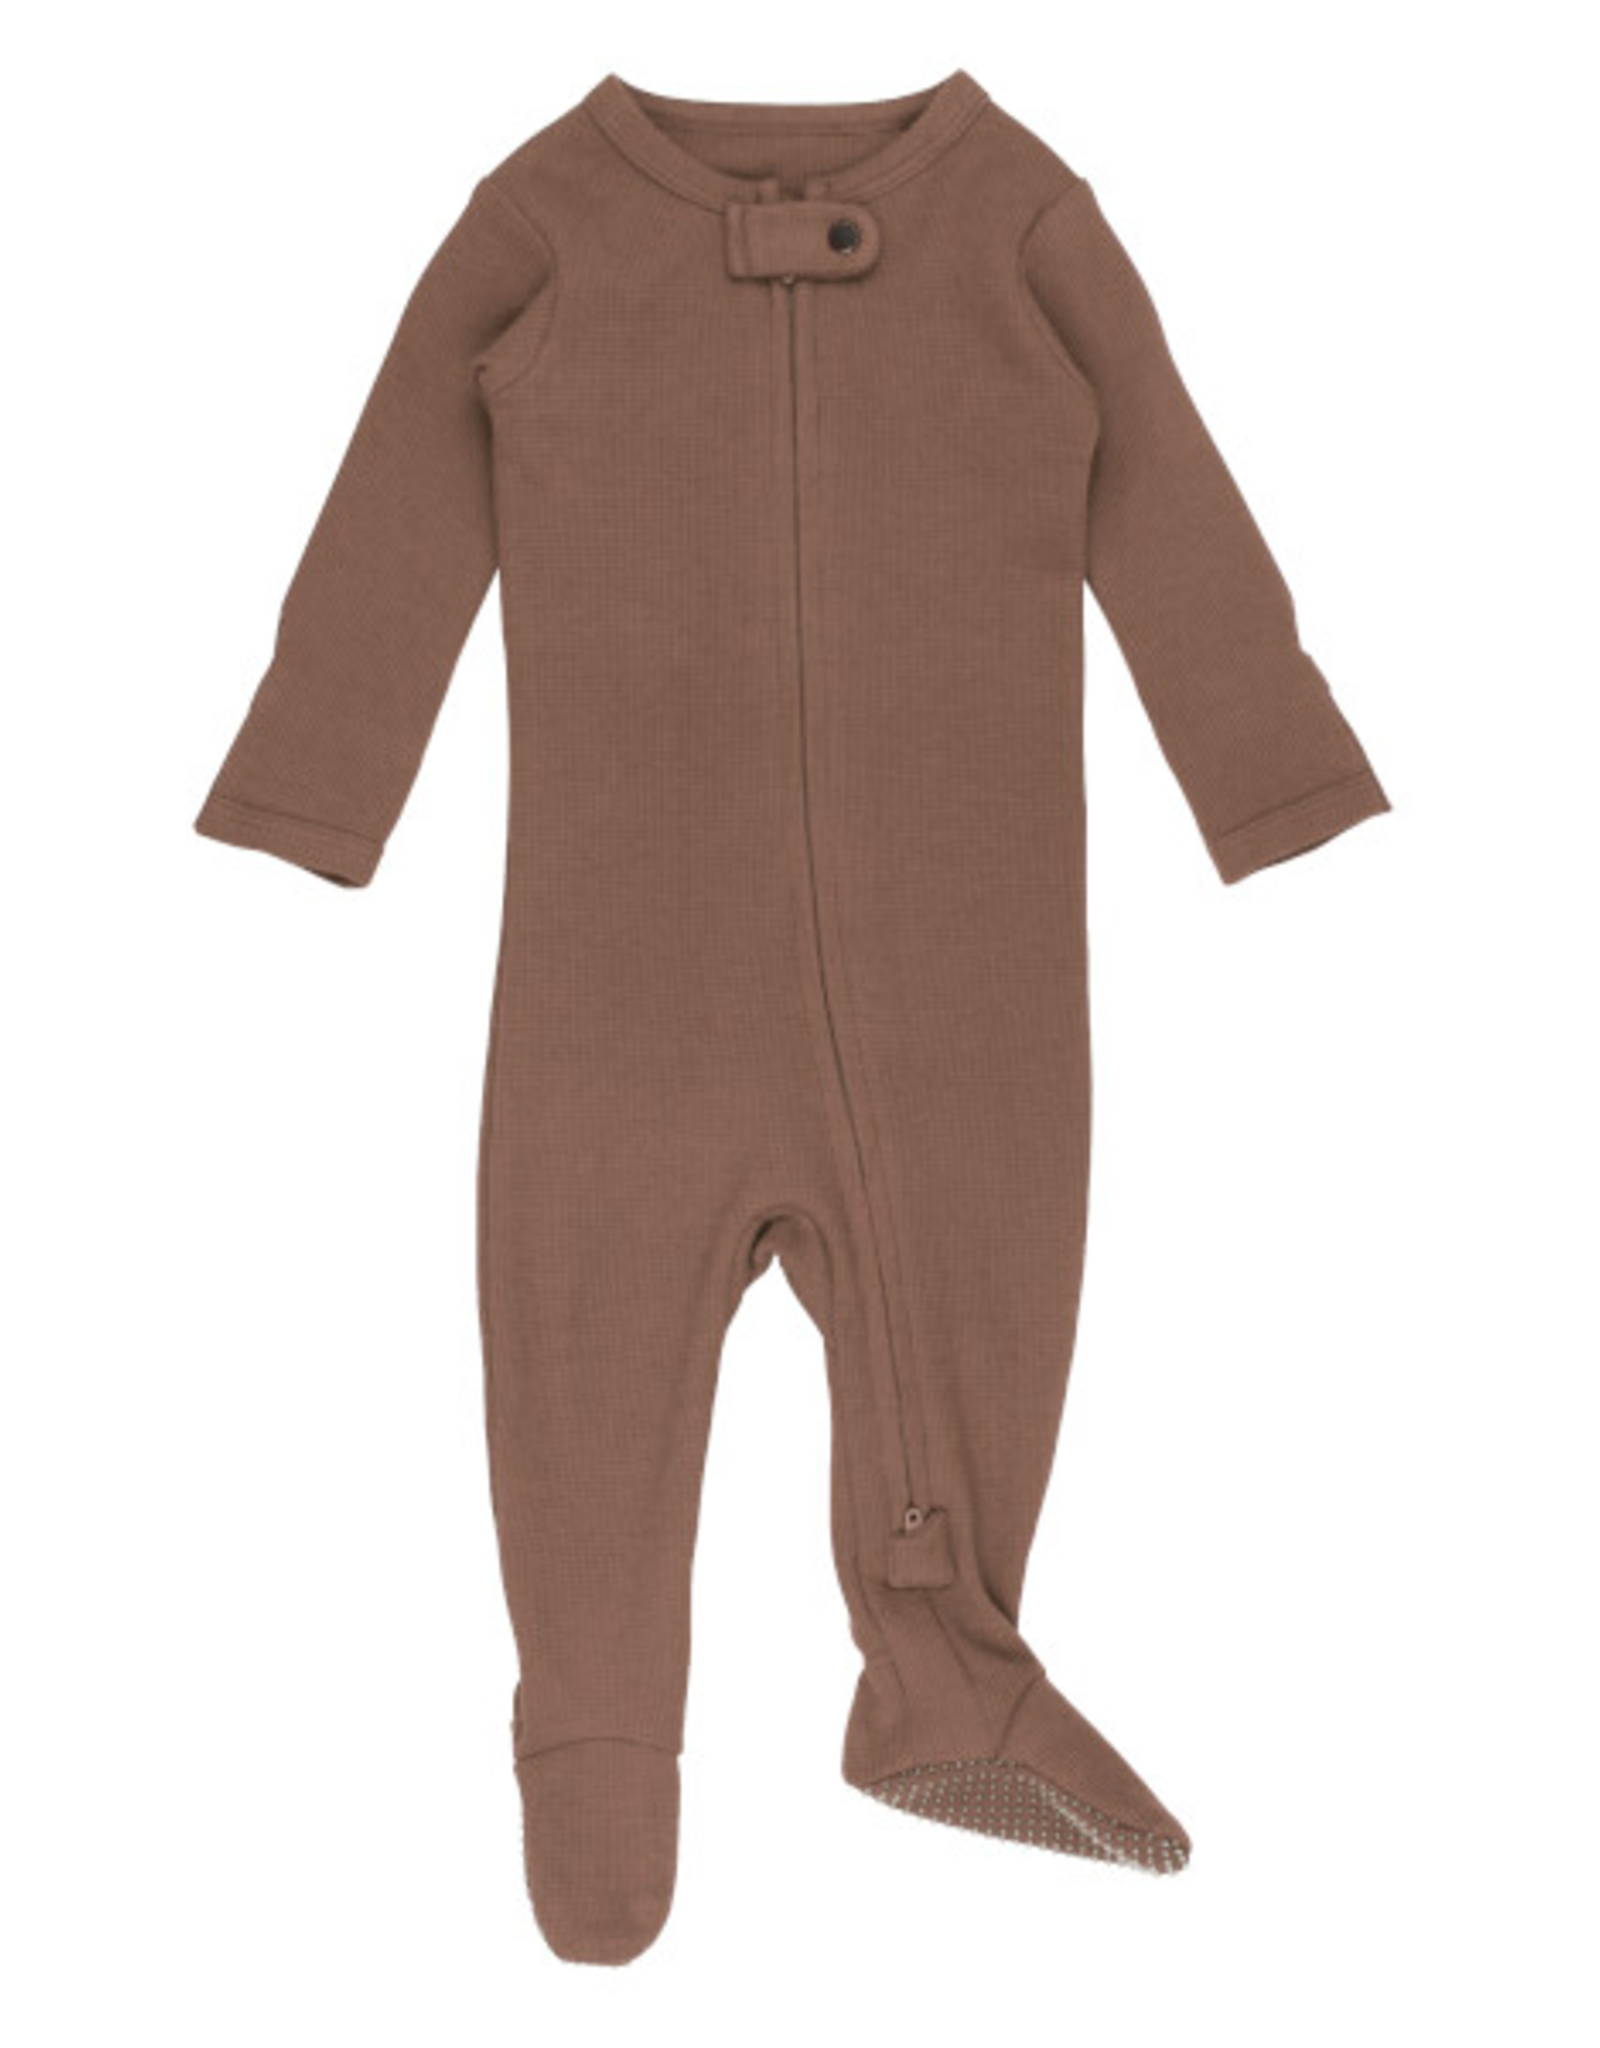 L'oved Baby Thermal Zipper Footie Cocoa - 9-12m